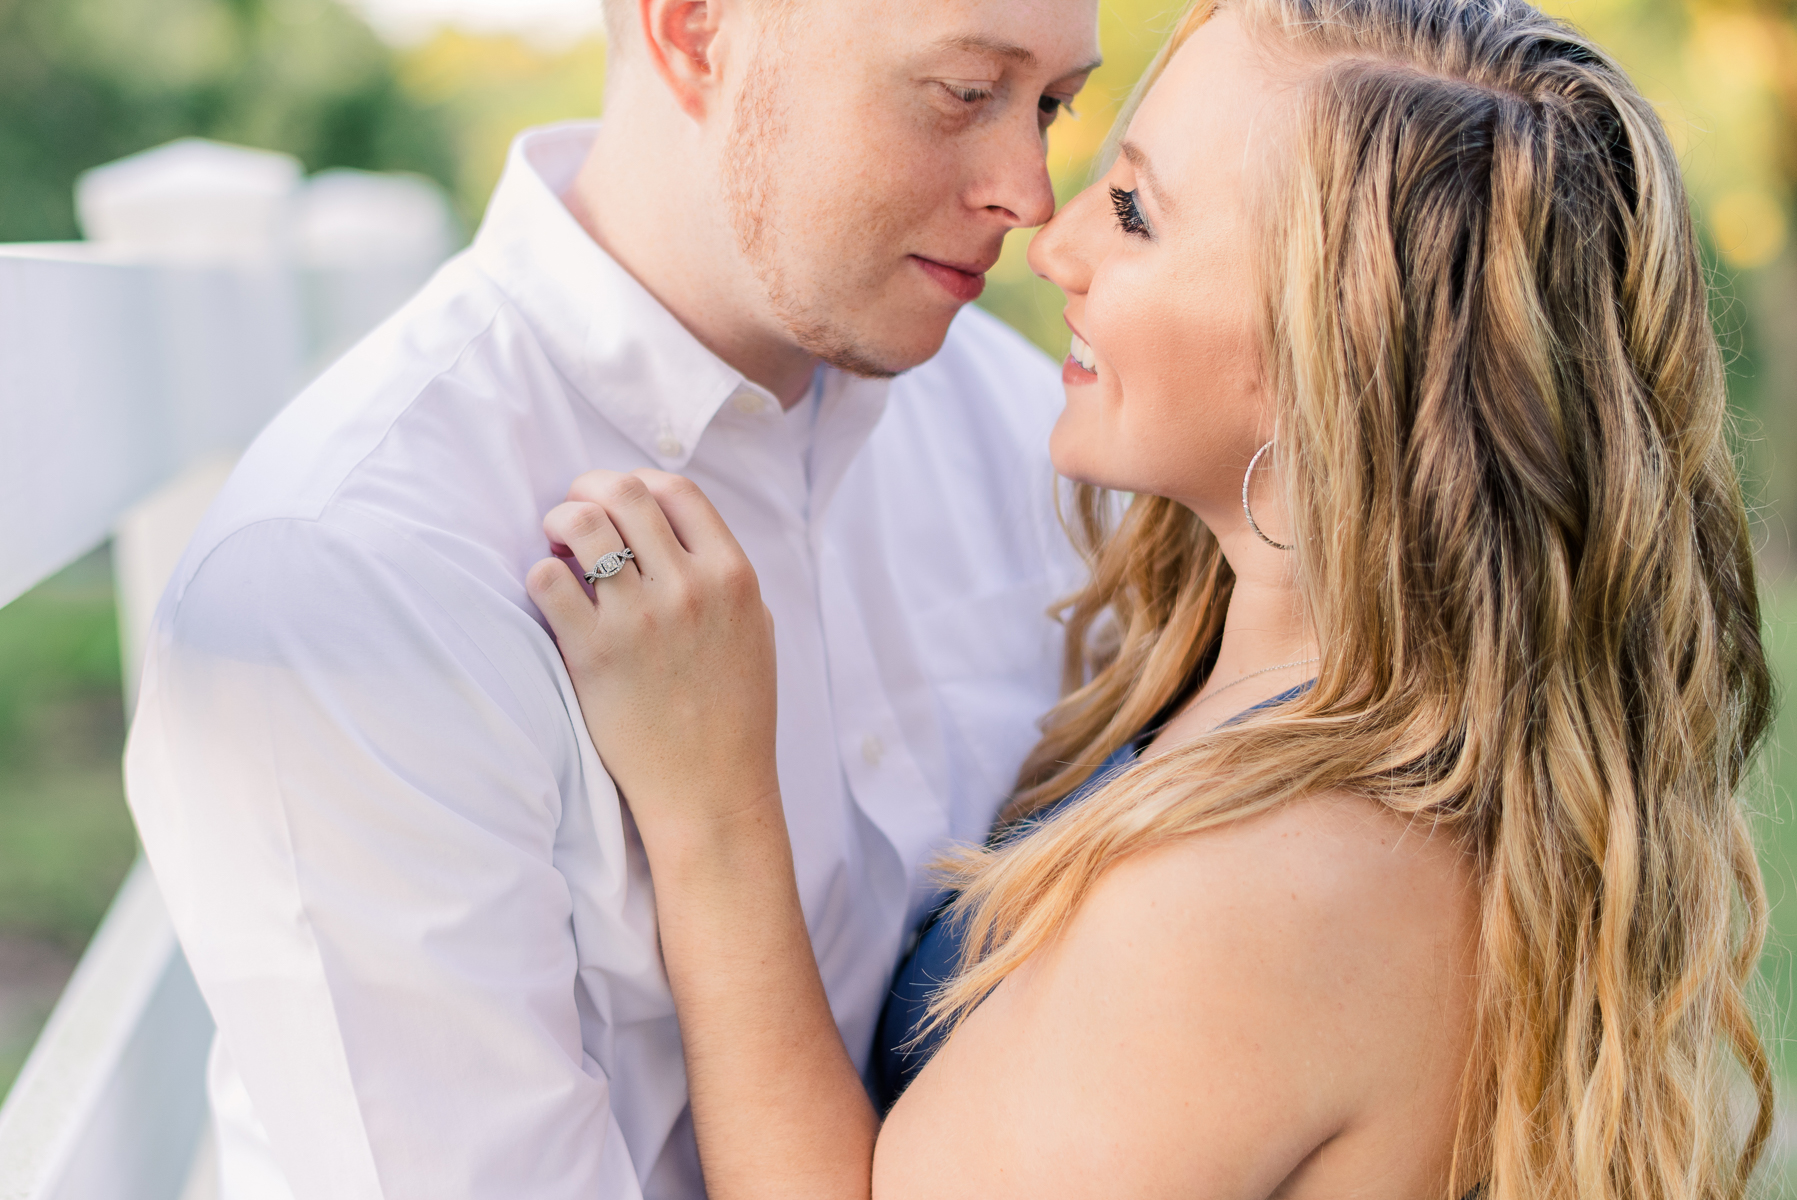 Courtney and Connor's Engagement Session at Up the Creek Farms 